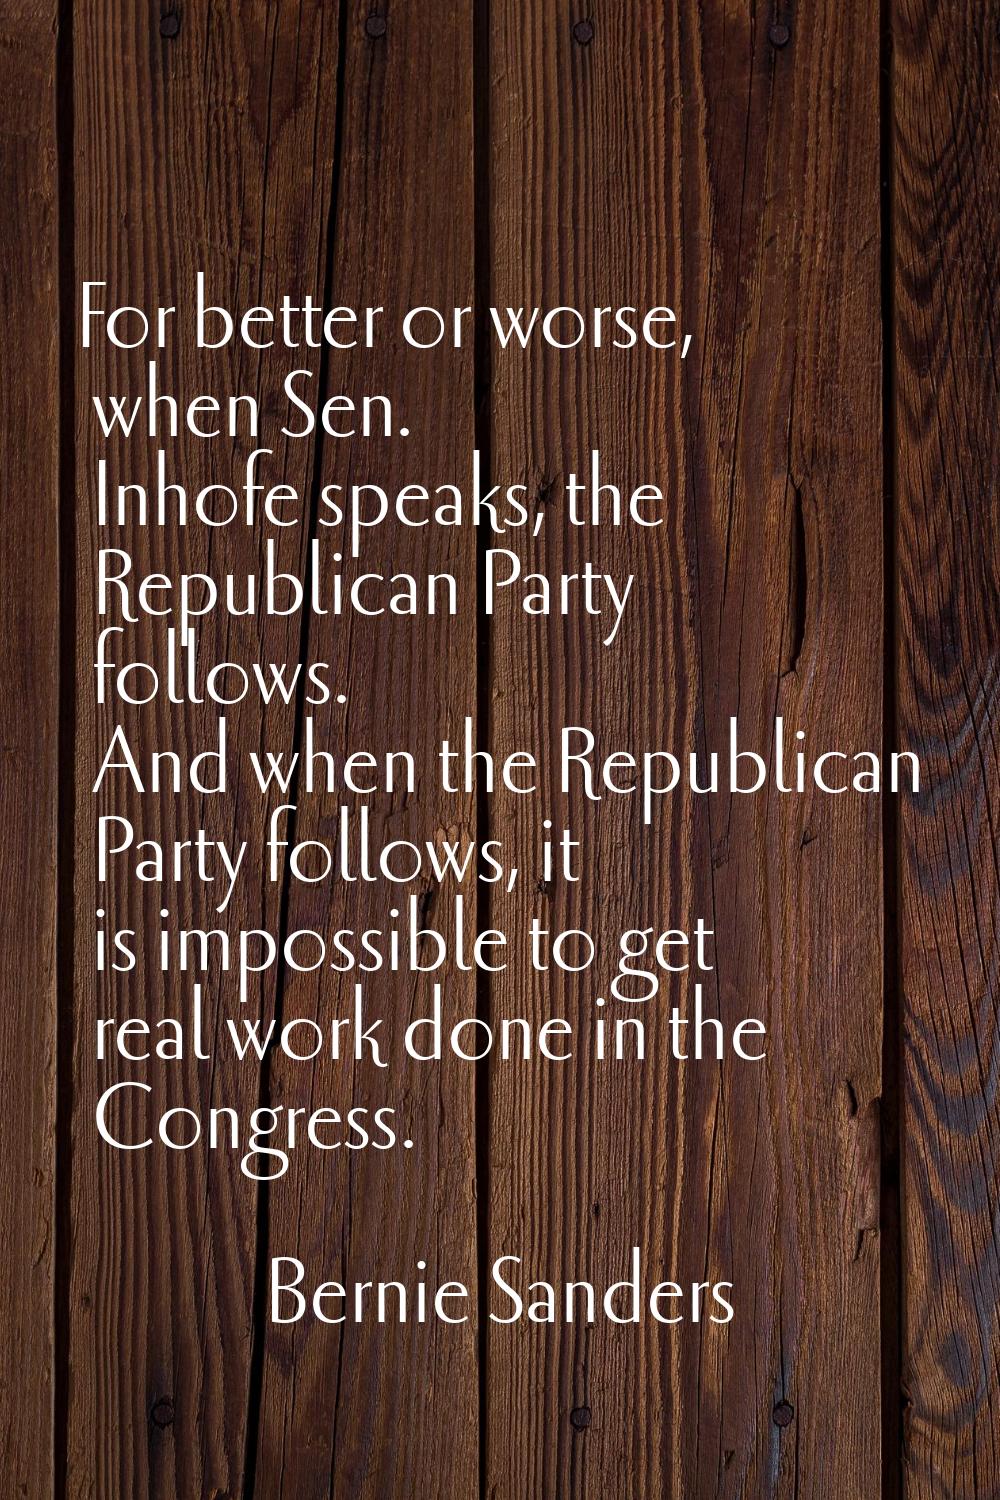 For better or worse, when Sen. Inhofe speaks, the Republican Party follows. And when the Republican